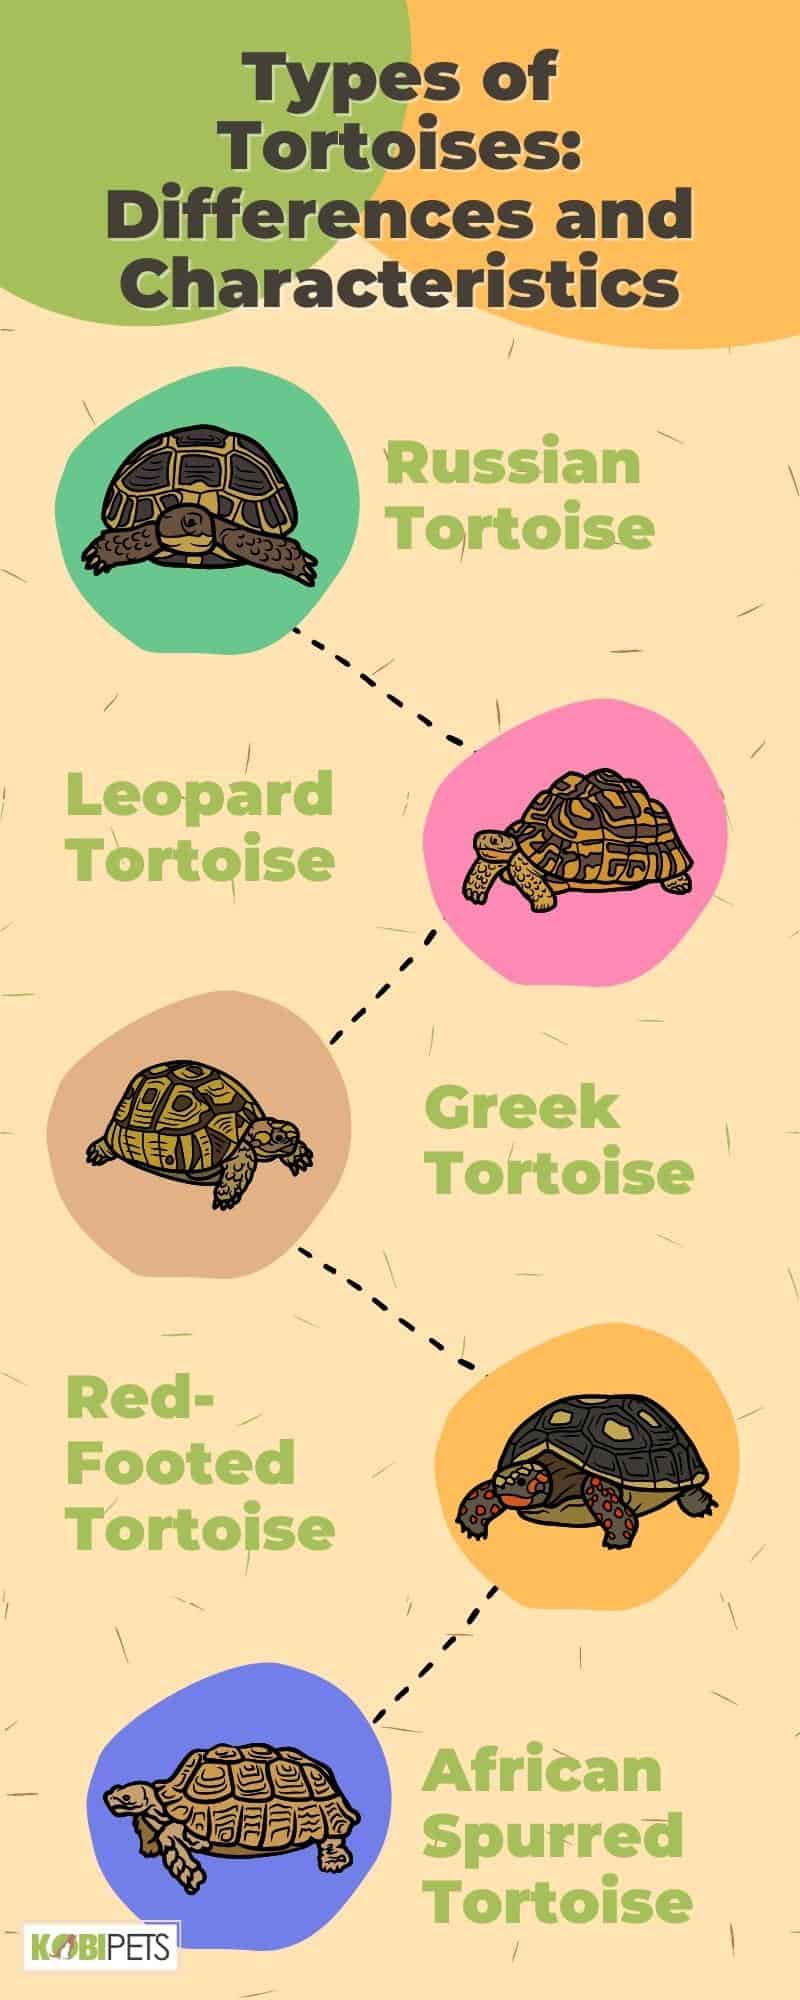 Types of Tortoises: Differences and Characteristics